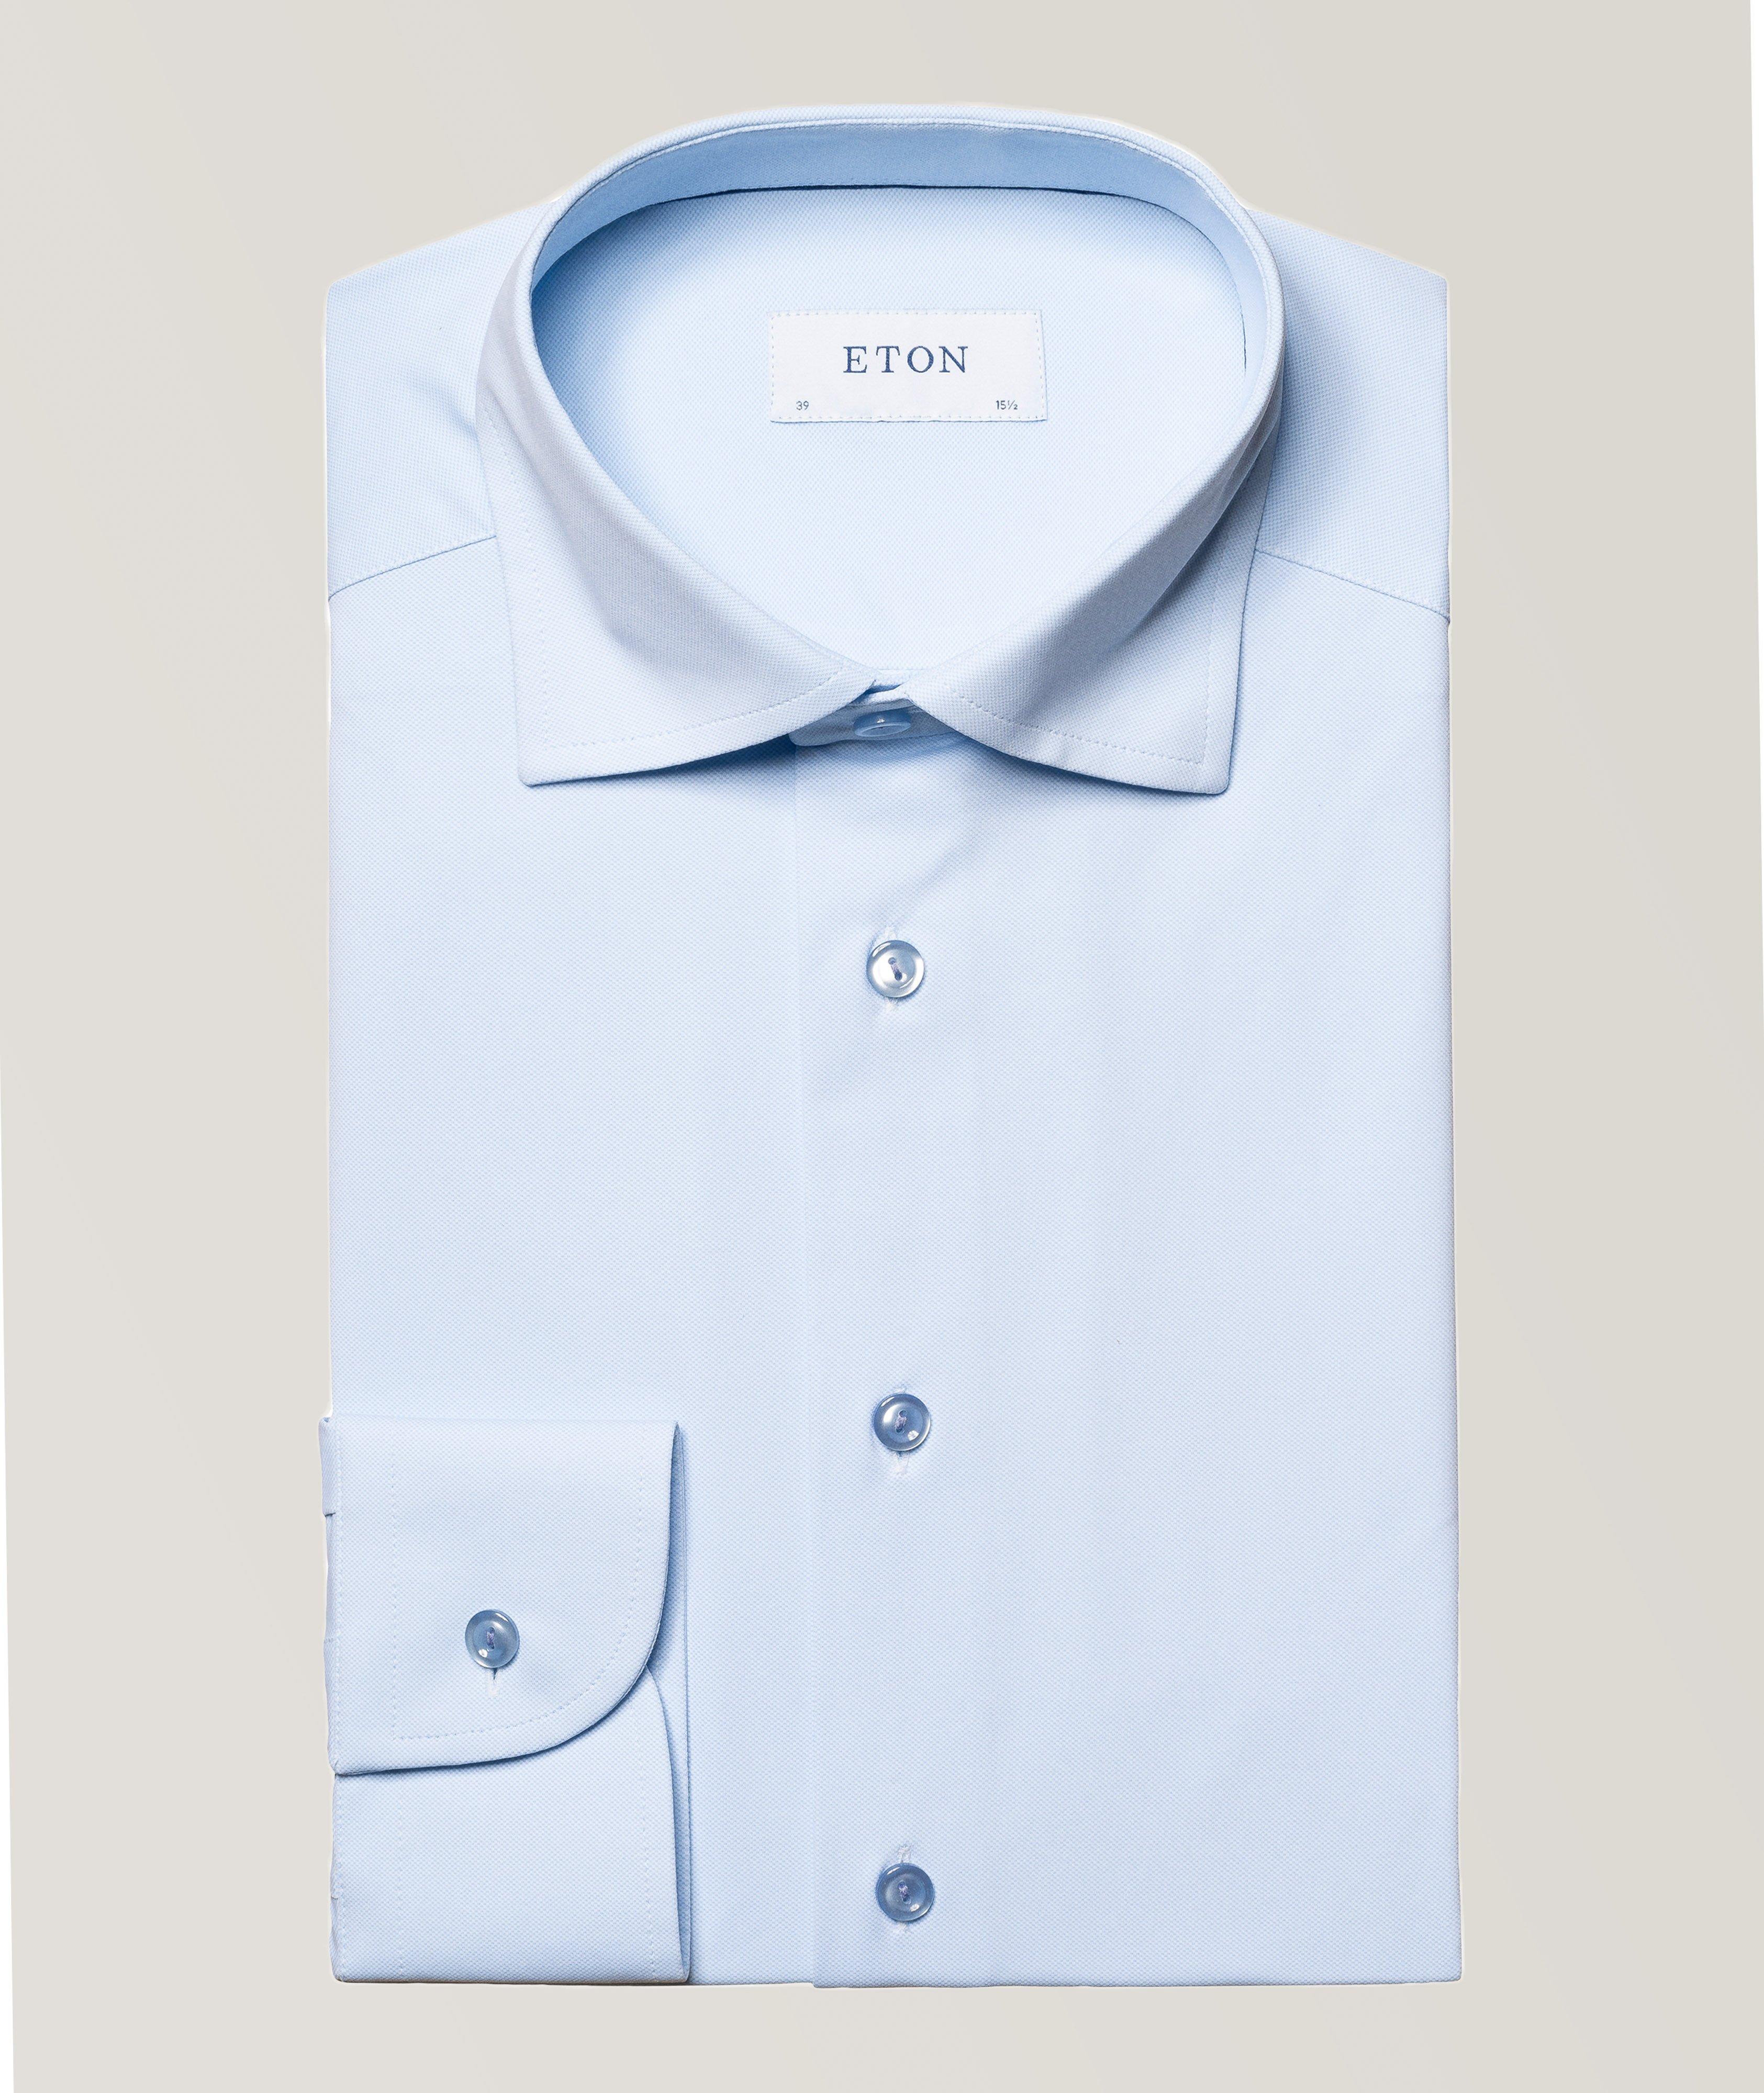 Slim Fit Four-Way Stretch Shirt with Tonal Buttons image 0